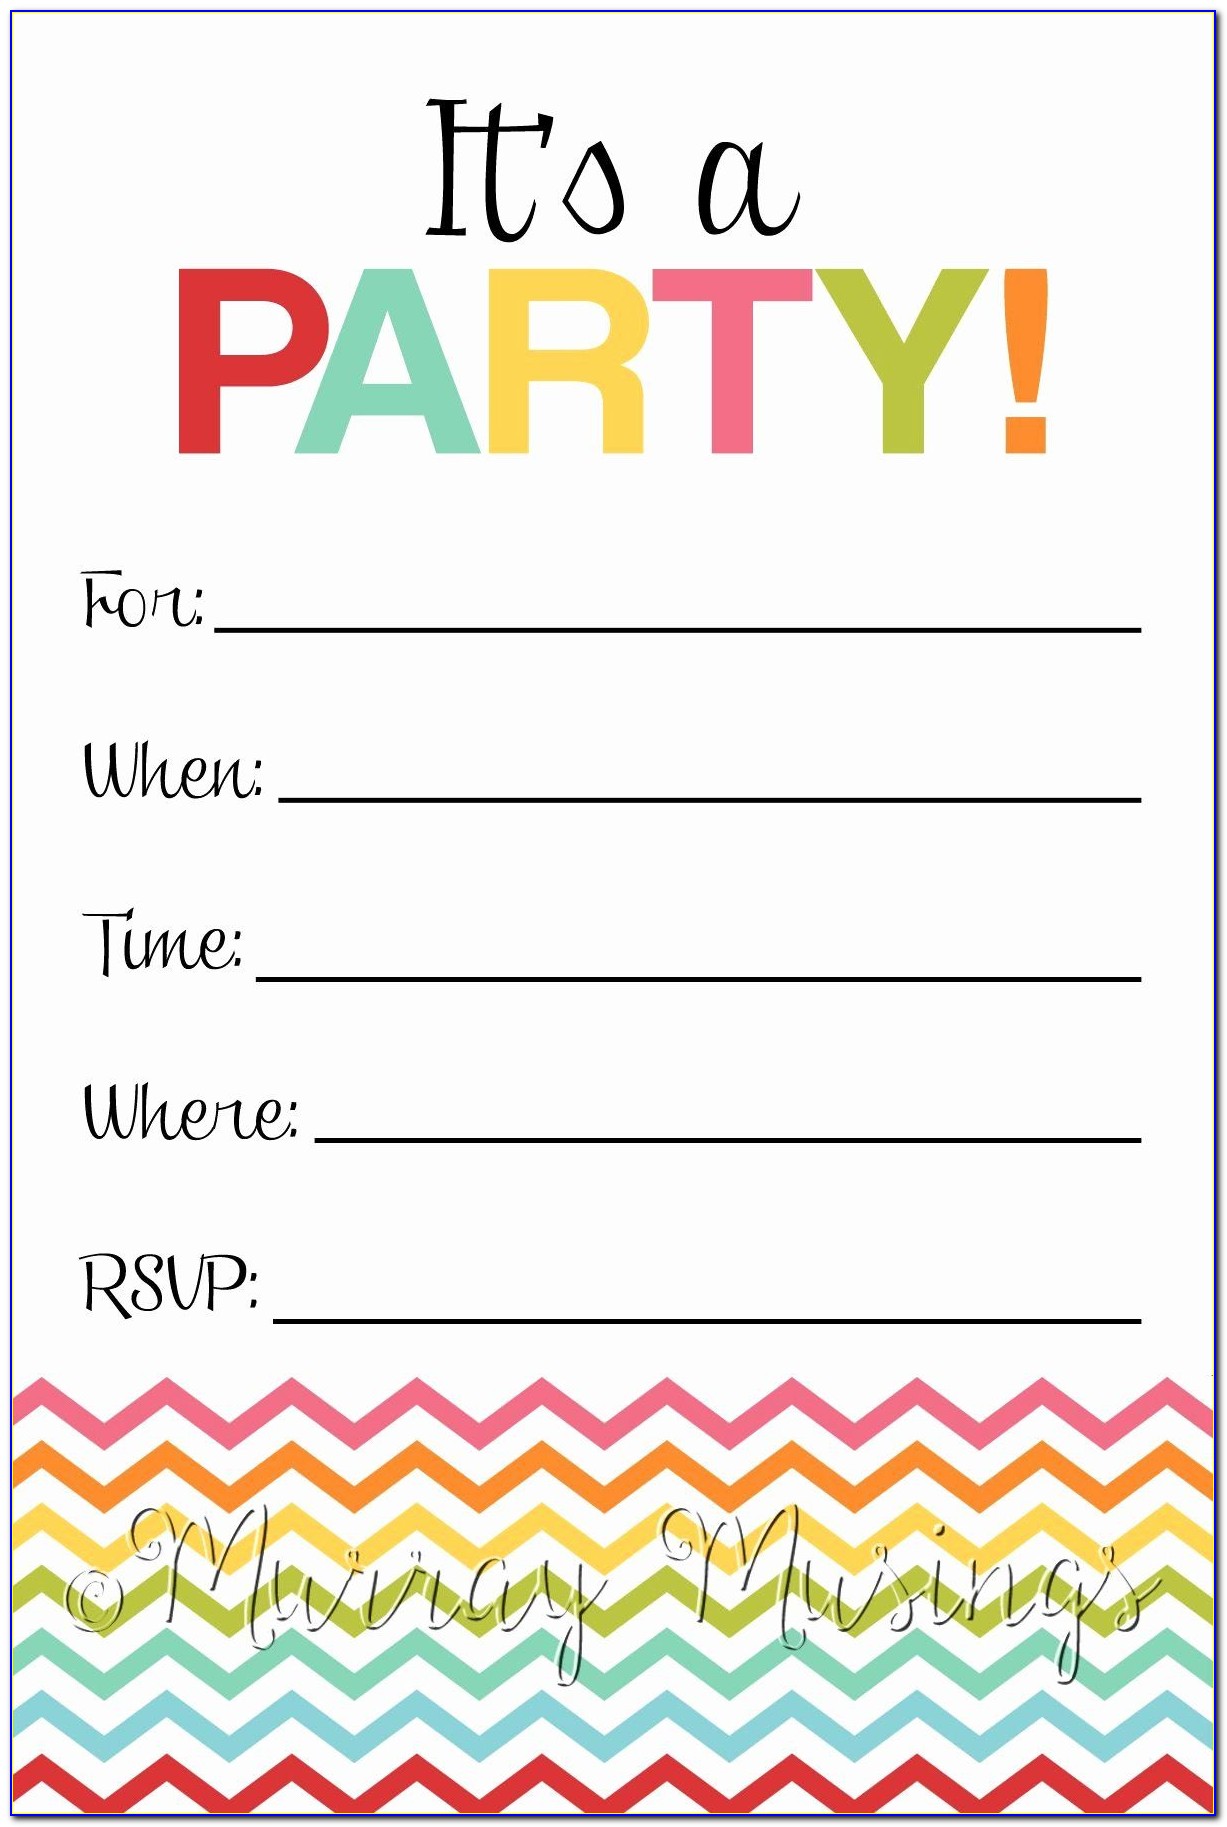 Fill In Party Invitations